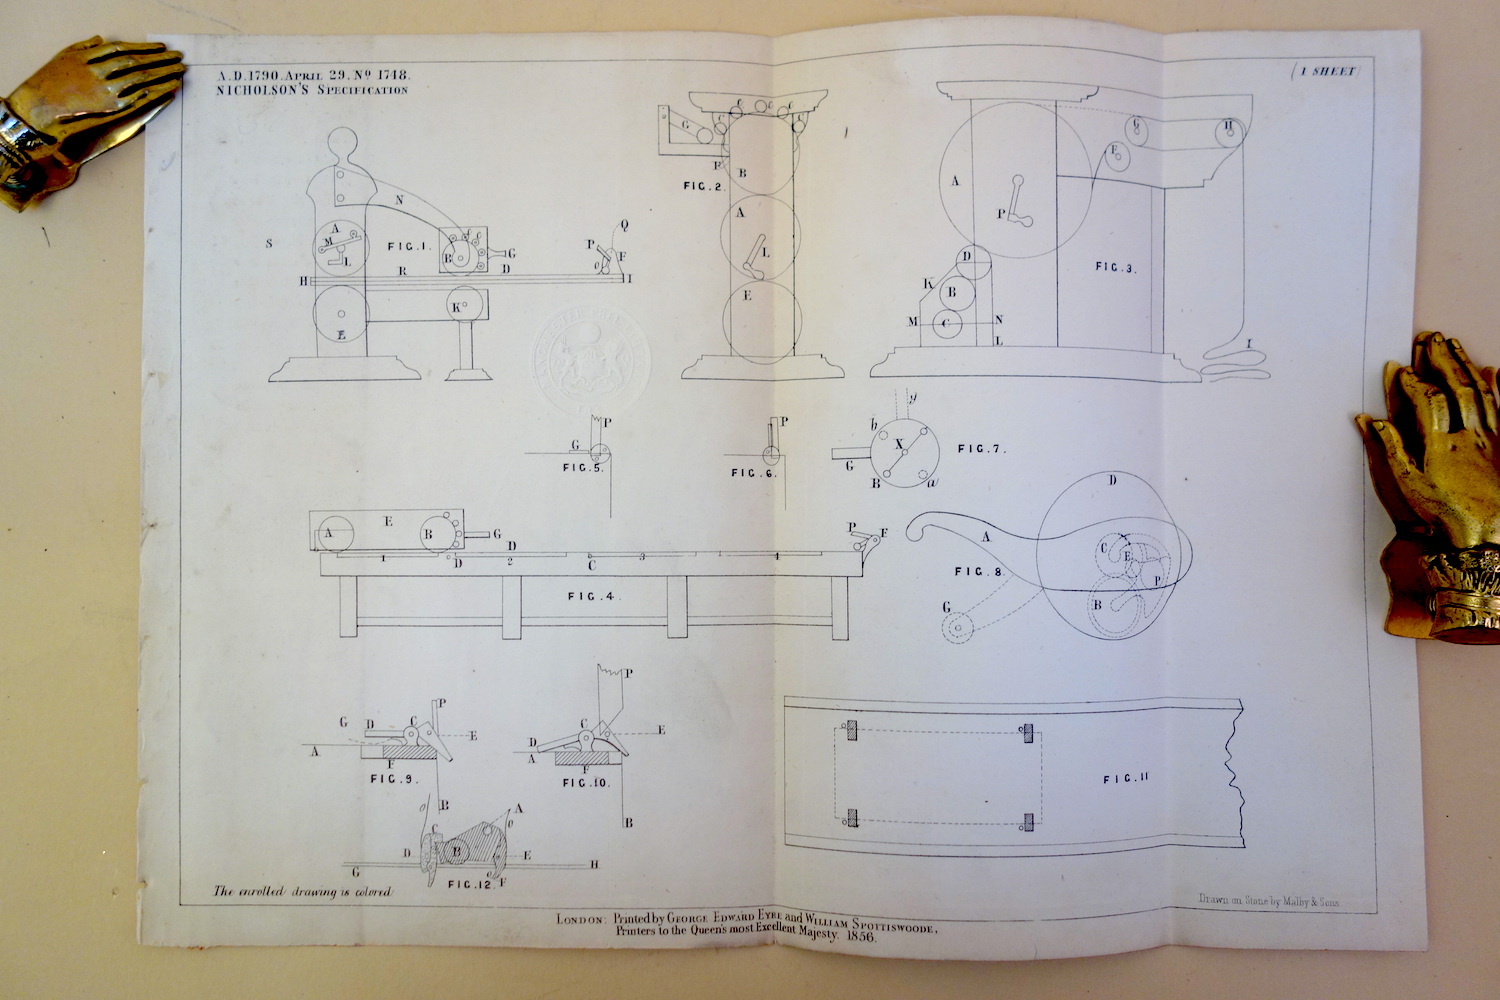 Diagrams associated with Nicholson's cylinder press patent (1790).